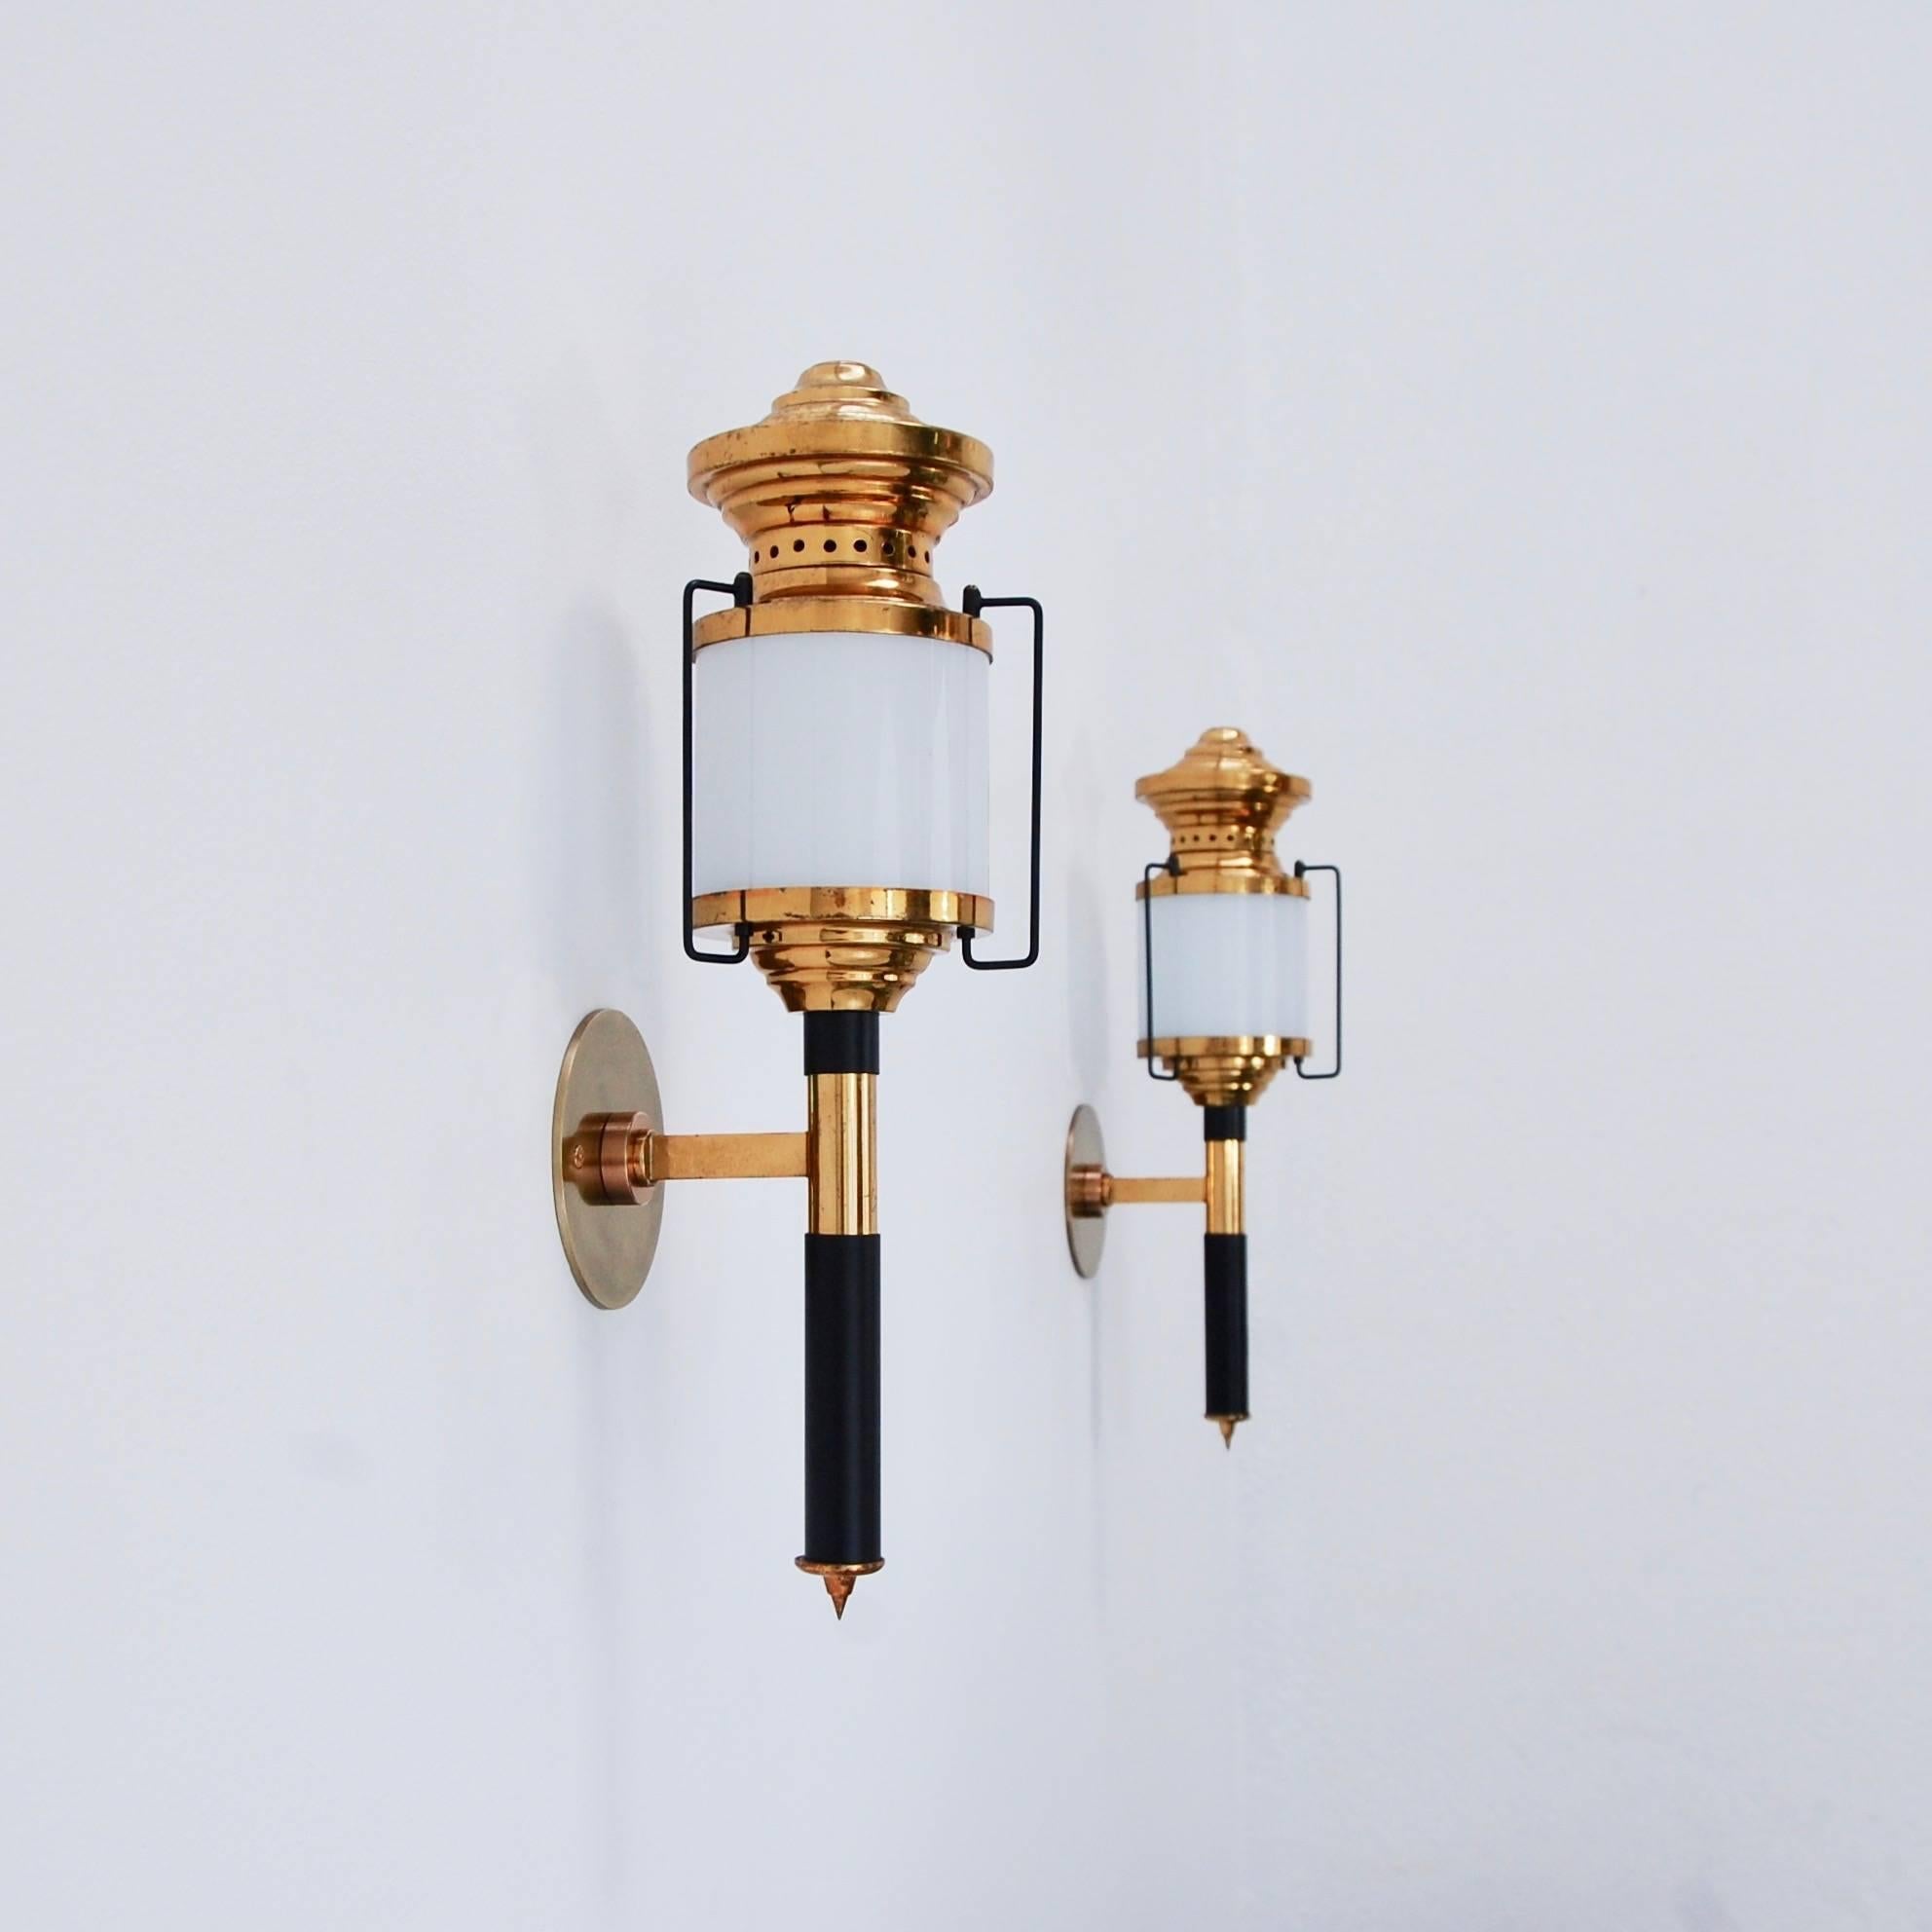 Six Italian indoor/outdoor modernist lanterns from of the period 1950s Italy. Partially restored, patina lacquered brass finish with a single E26 medium based socket per glass cylinder shade. Backplate are 4